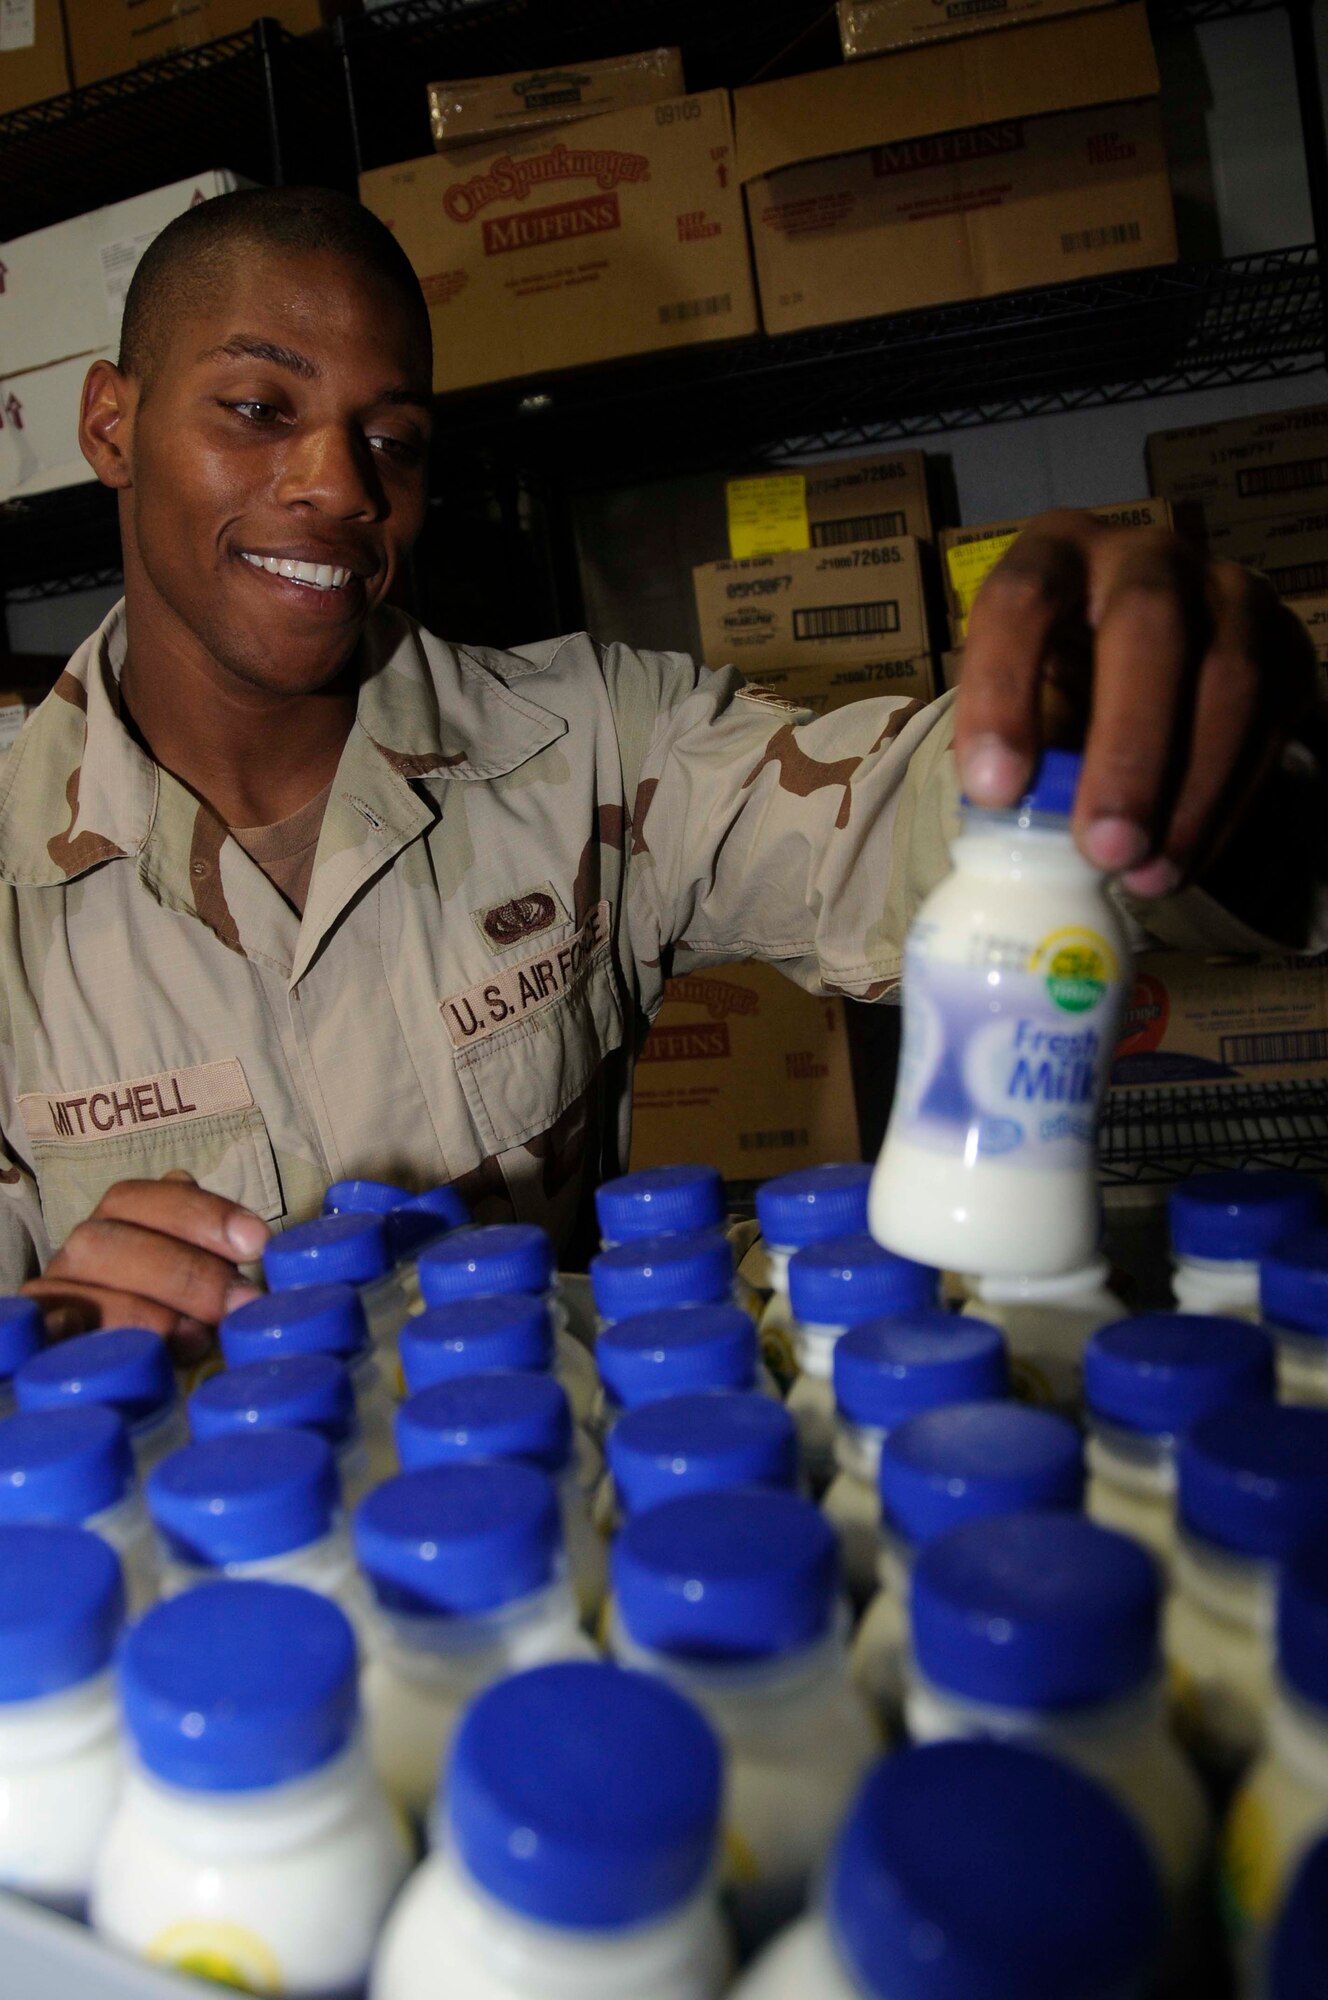 Senior Airman Adrian Mitchell, a store room clerk with the 379th Expeditionary Force Support Squadron, checks the expiration dates of milk in a dining facility Aug. 5, at an undisclosed location in Southwest Asia. Airman Mitchell, a native of Atlanta, Ga., is deployed from Ellsworth Air Force Base, S.D. (U.S. Air Force photo by Staff Sgt. Darnell T. Cannady)